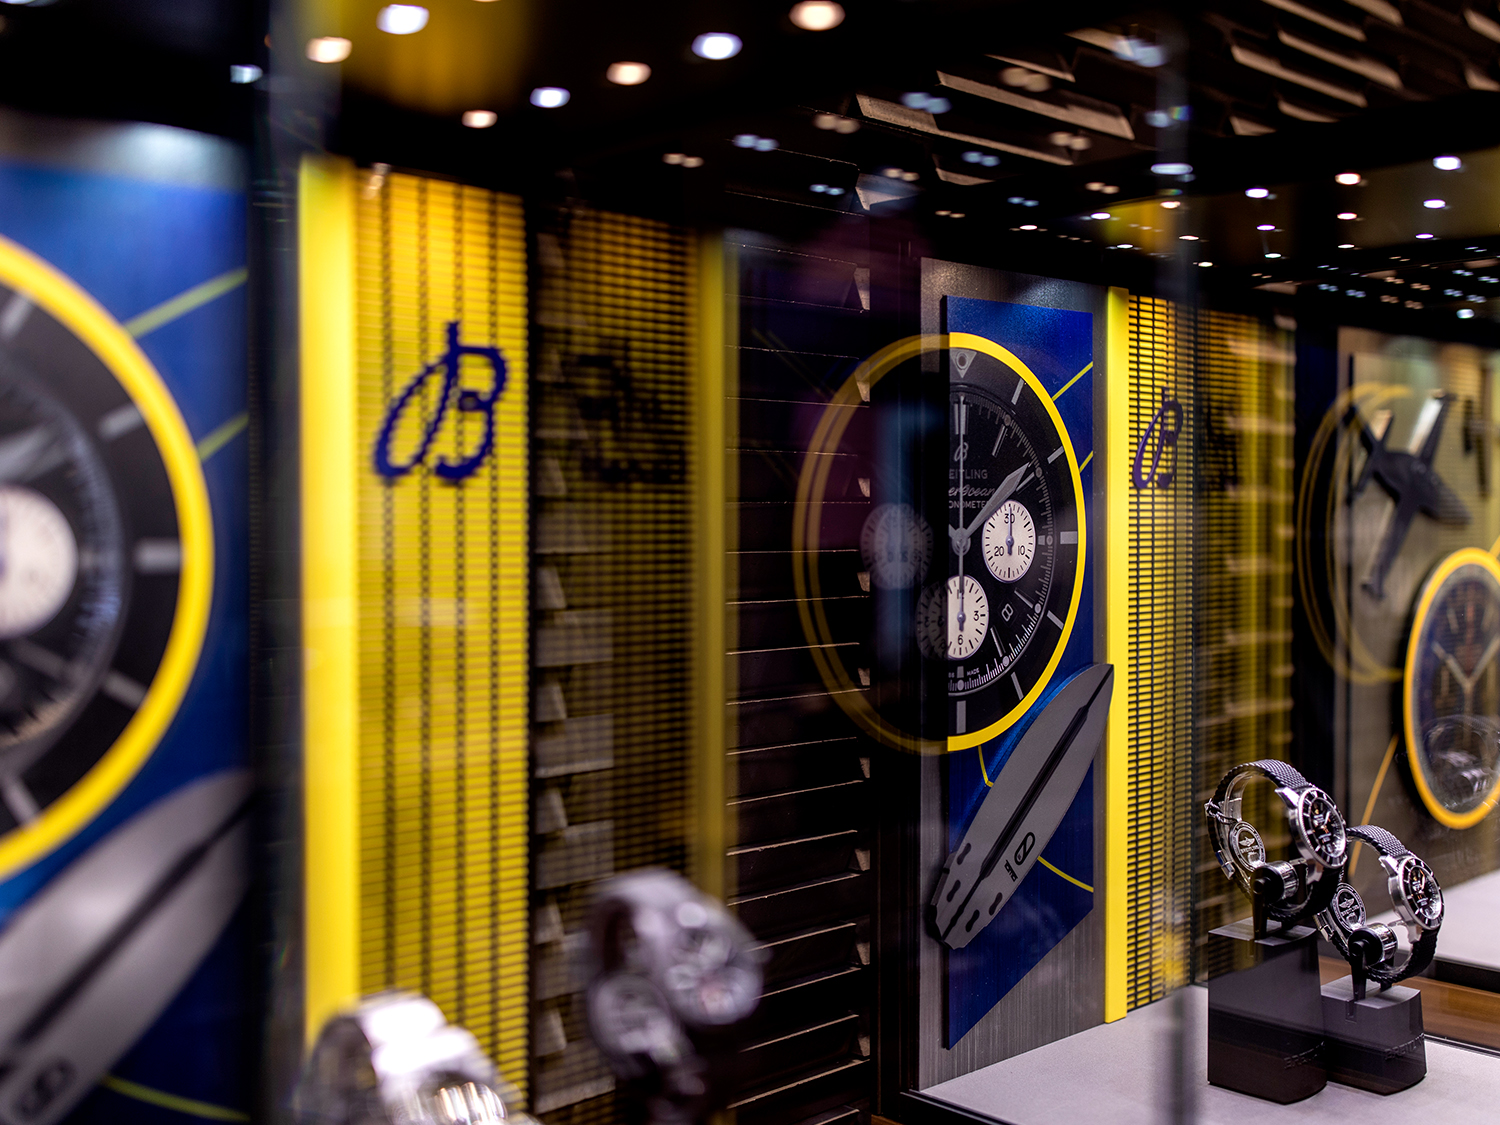 DFROST, Breitling, Window Campaign, Conception, Development, luxury, watches, window system